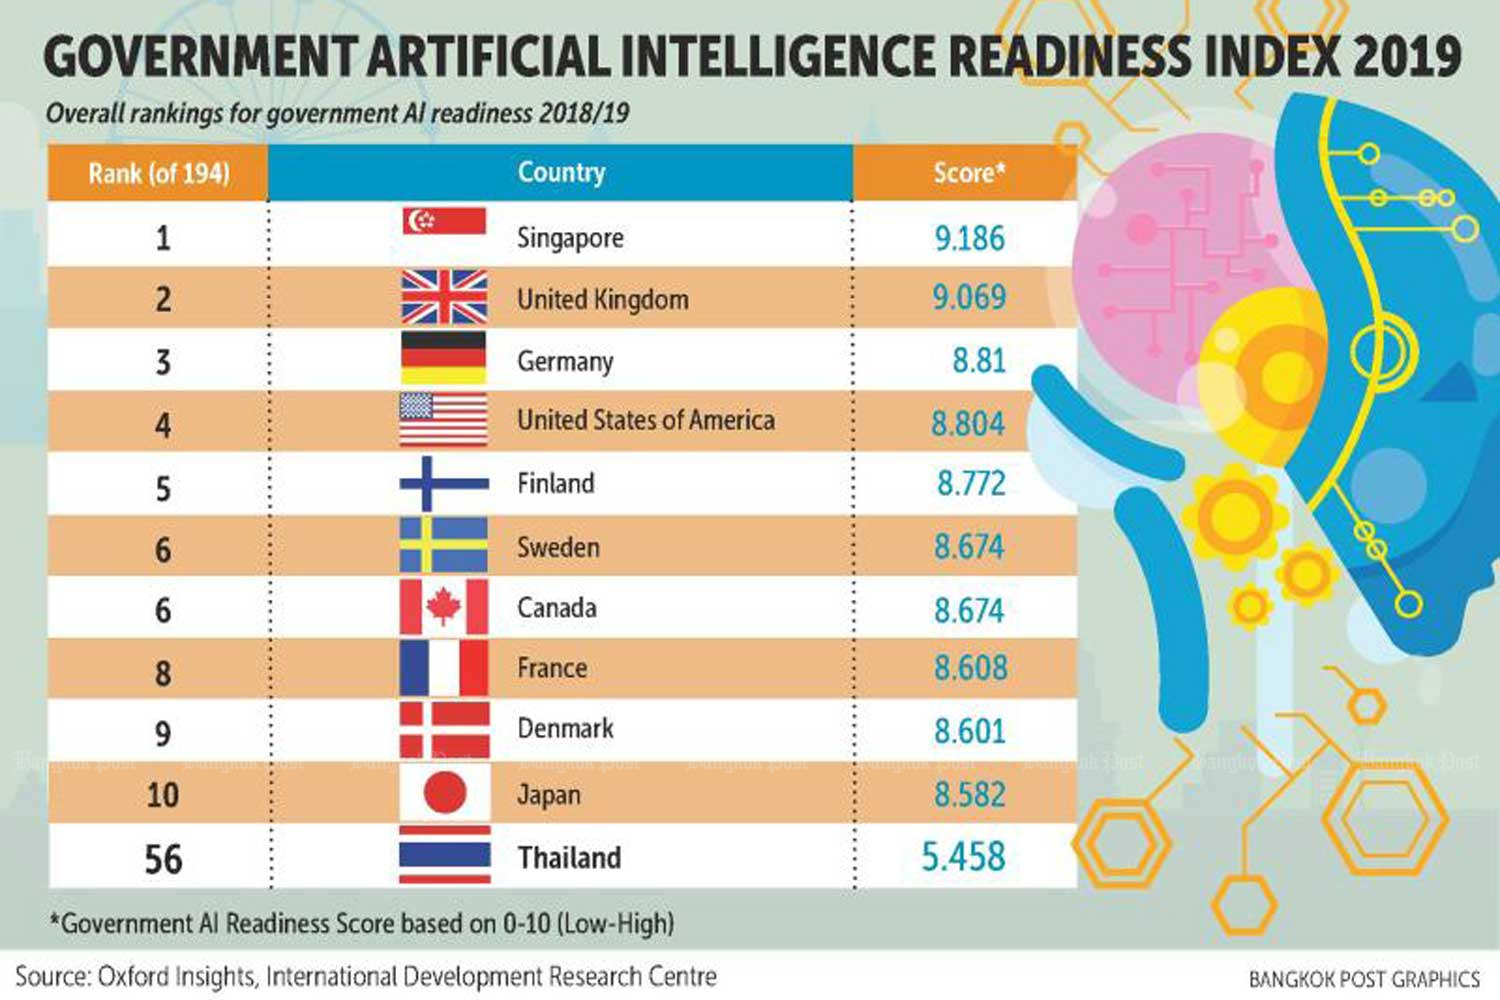 Thailand 56th in AI readiness index ASEAN Economic Community Strategy Center